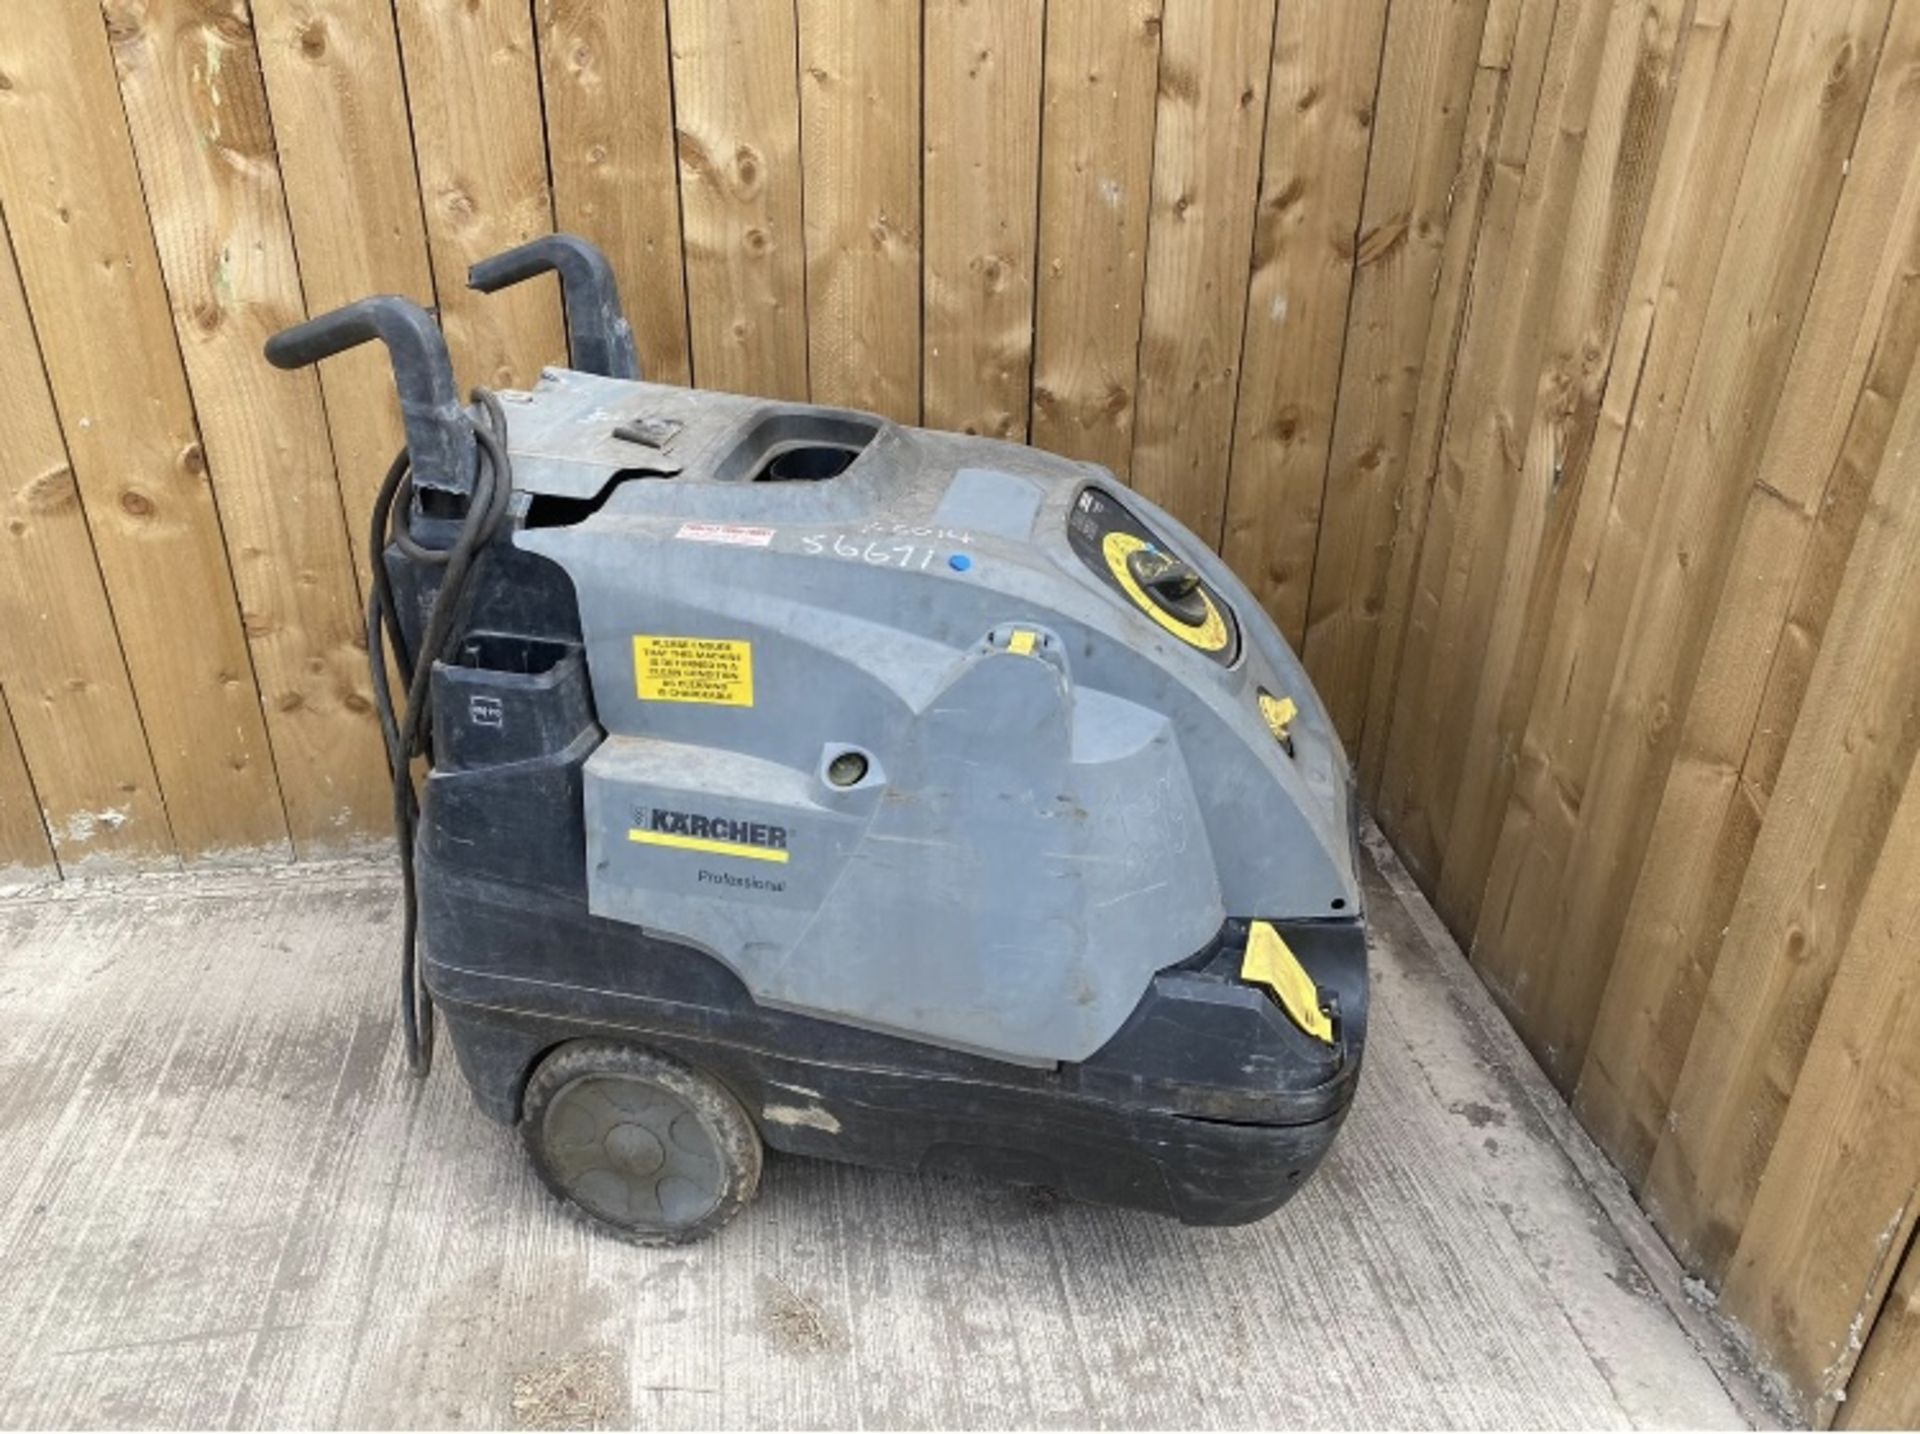 KARCHER HOT & COLD POWER WASHER LOCATION: N. YORKSHIRE